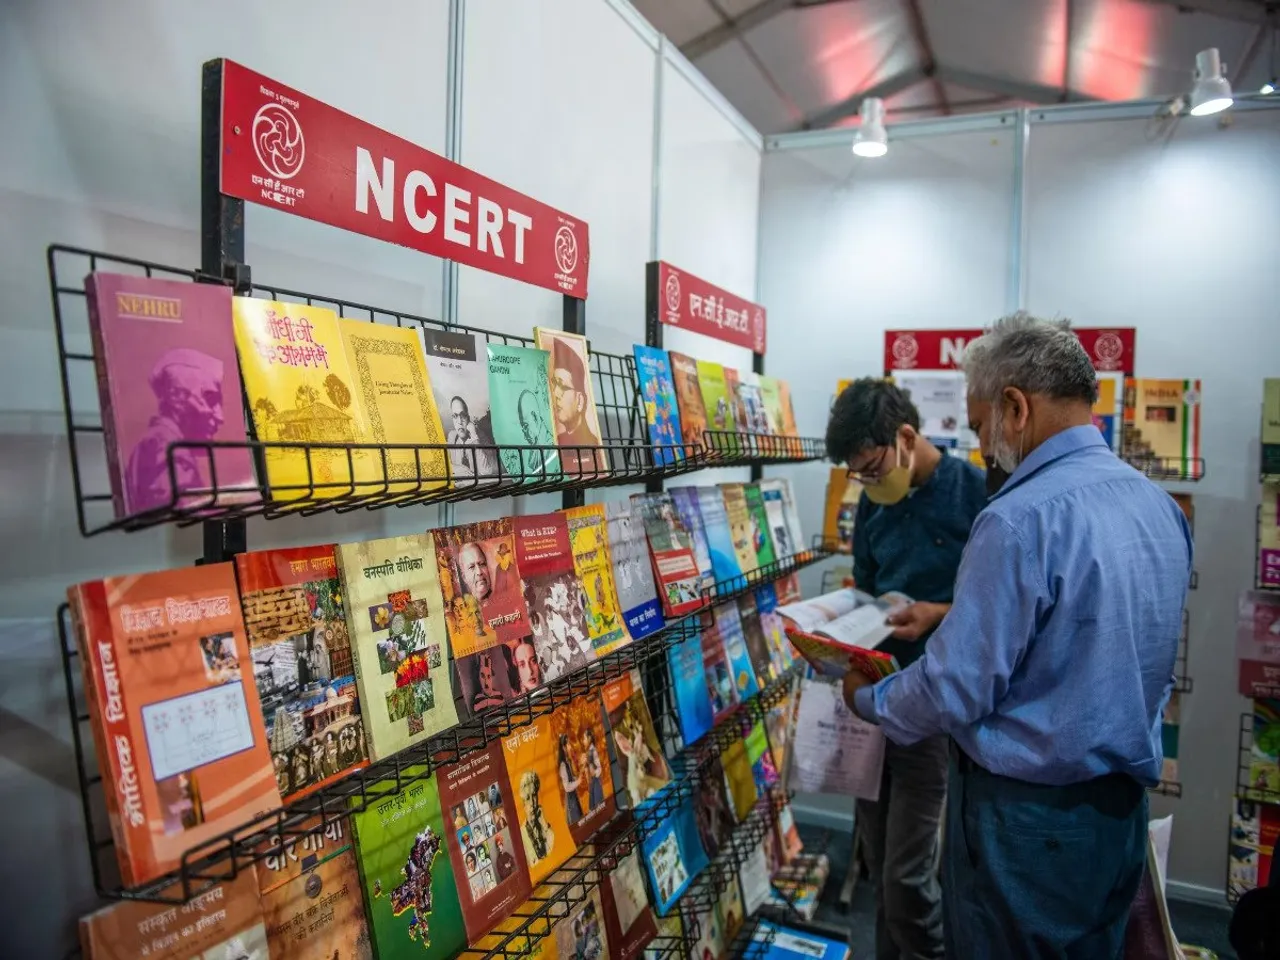 Collective effort in jeopardy, drop our names from textbooks: Academicians to NCERT